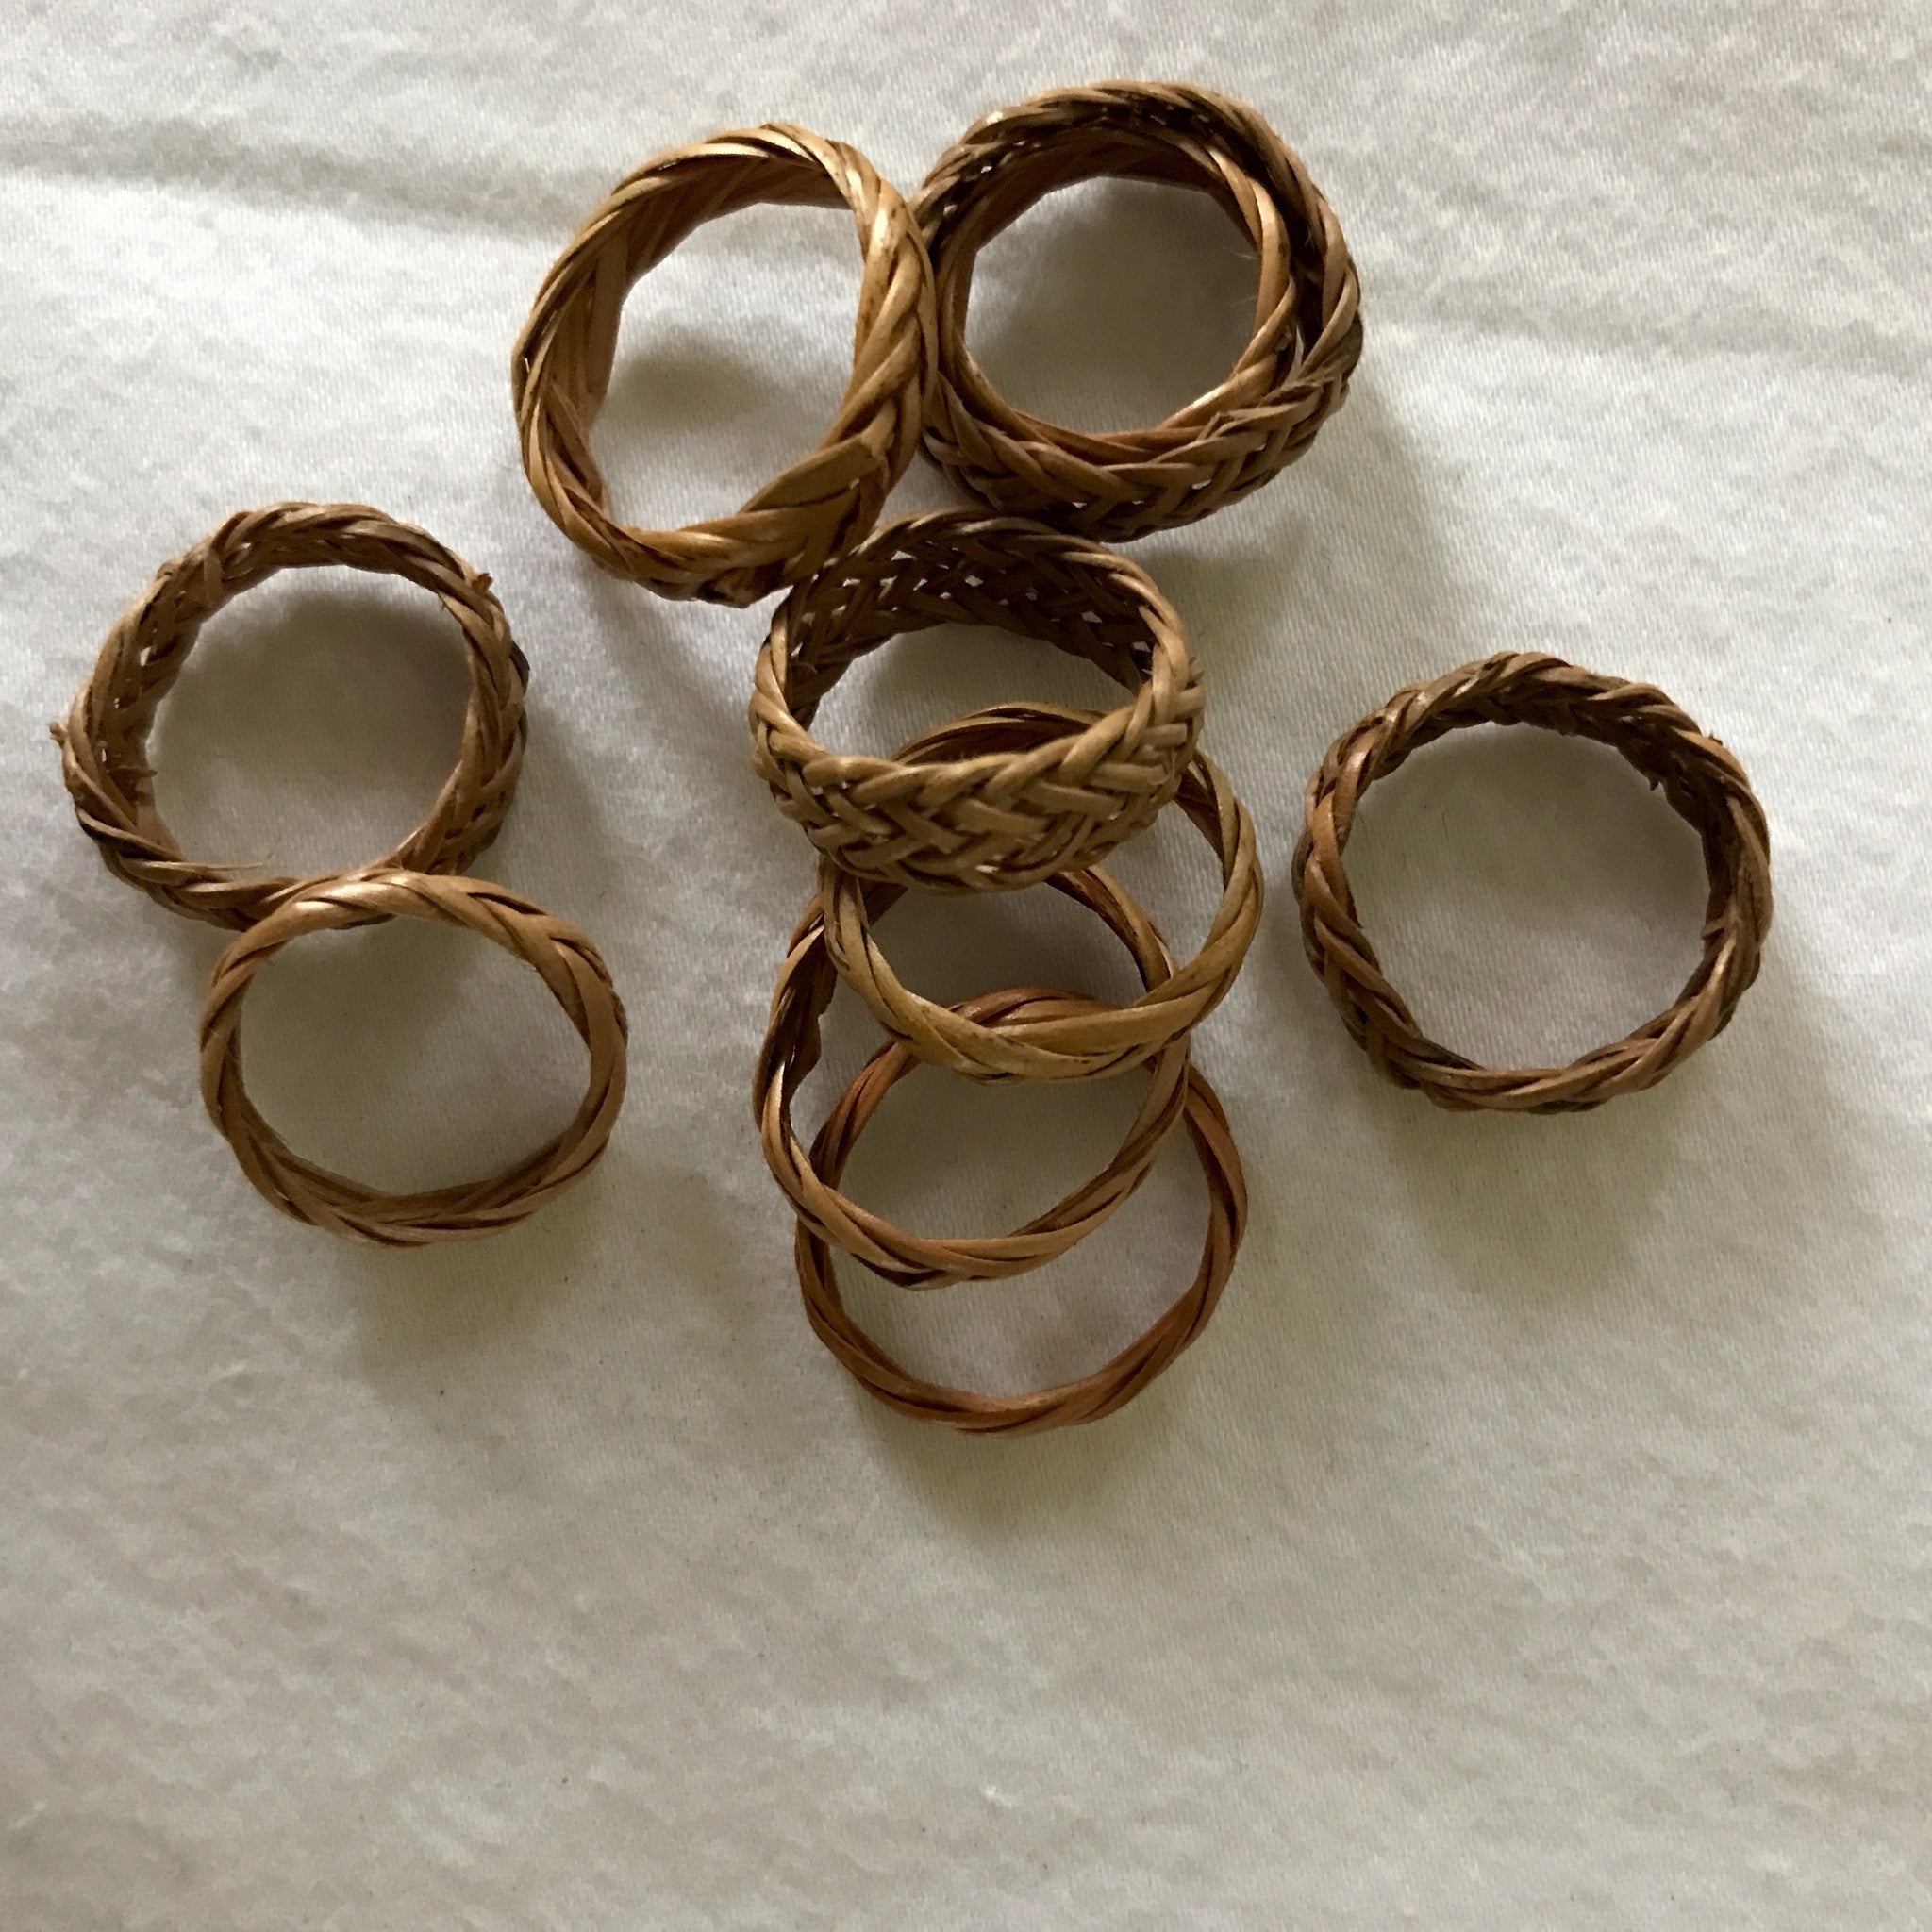 woven rings from bali